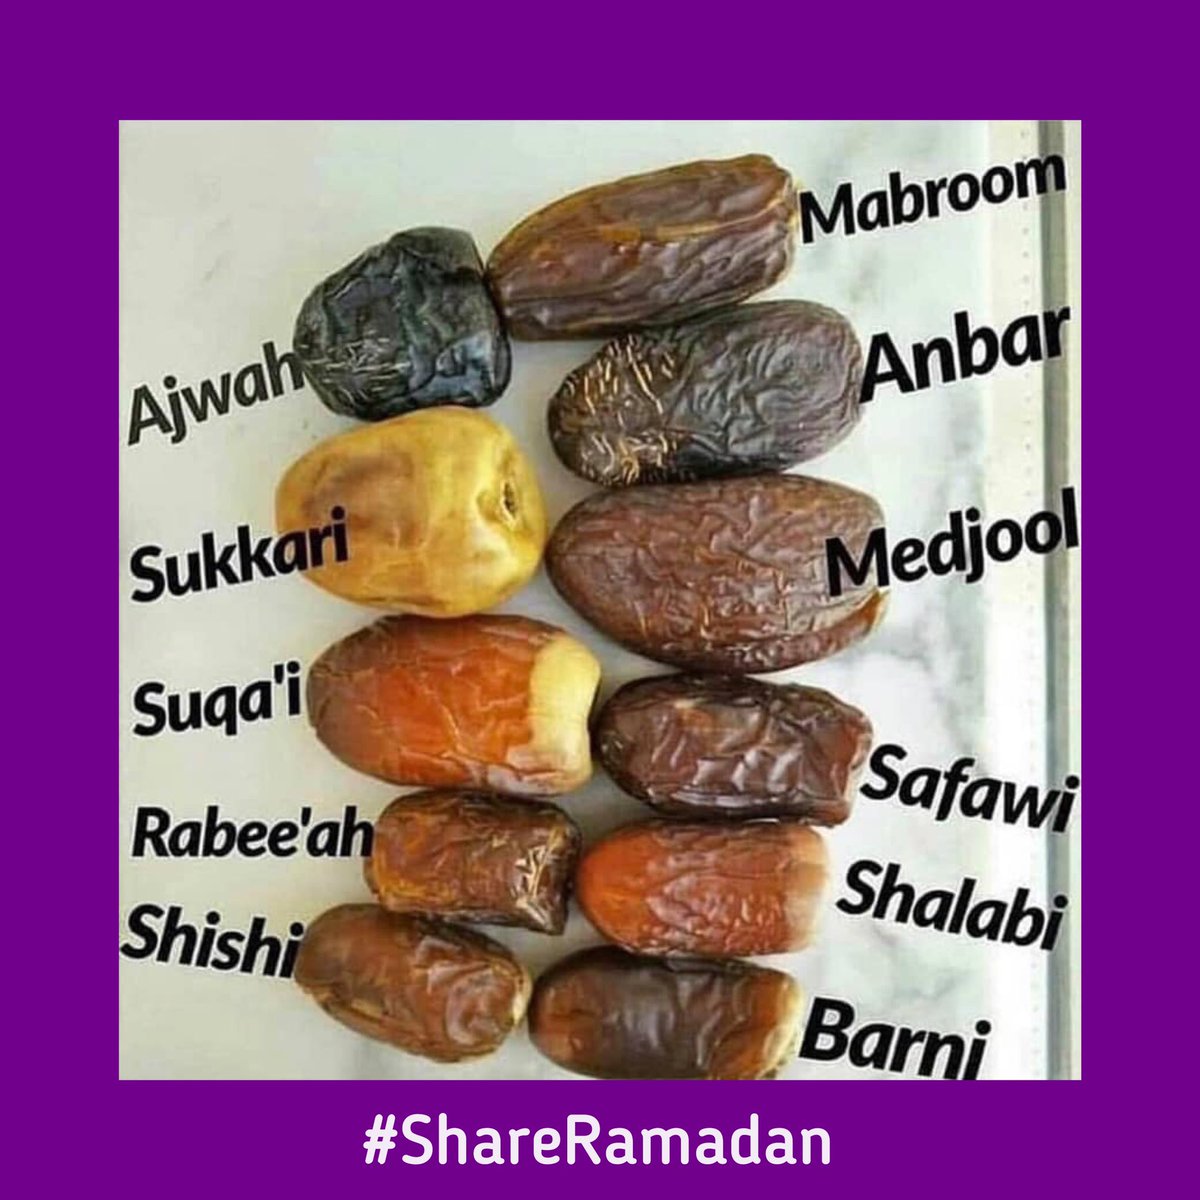 What’s your date this Ramadan? 

Tell us below 👇🏻

#ShareRamadan 

Challenge a friend to fast for a day and invite them to your house this Ramadan. Get a date in your diary today 😊 #whowillyouinvite